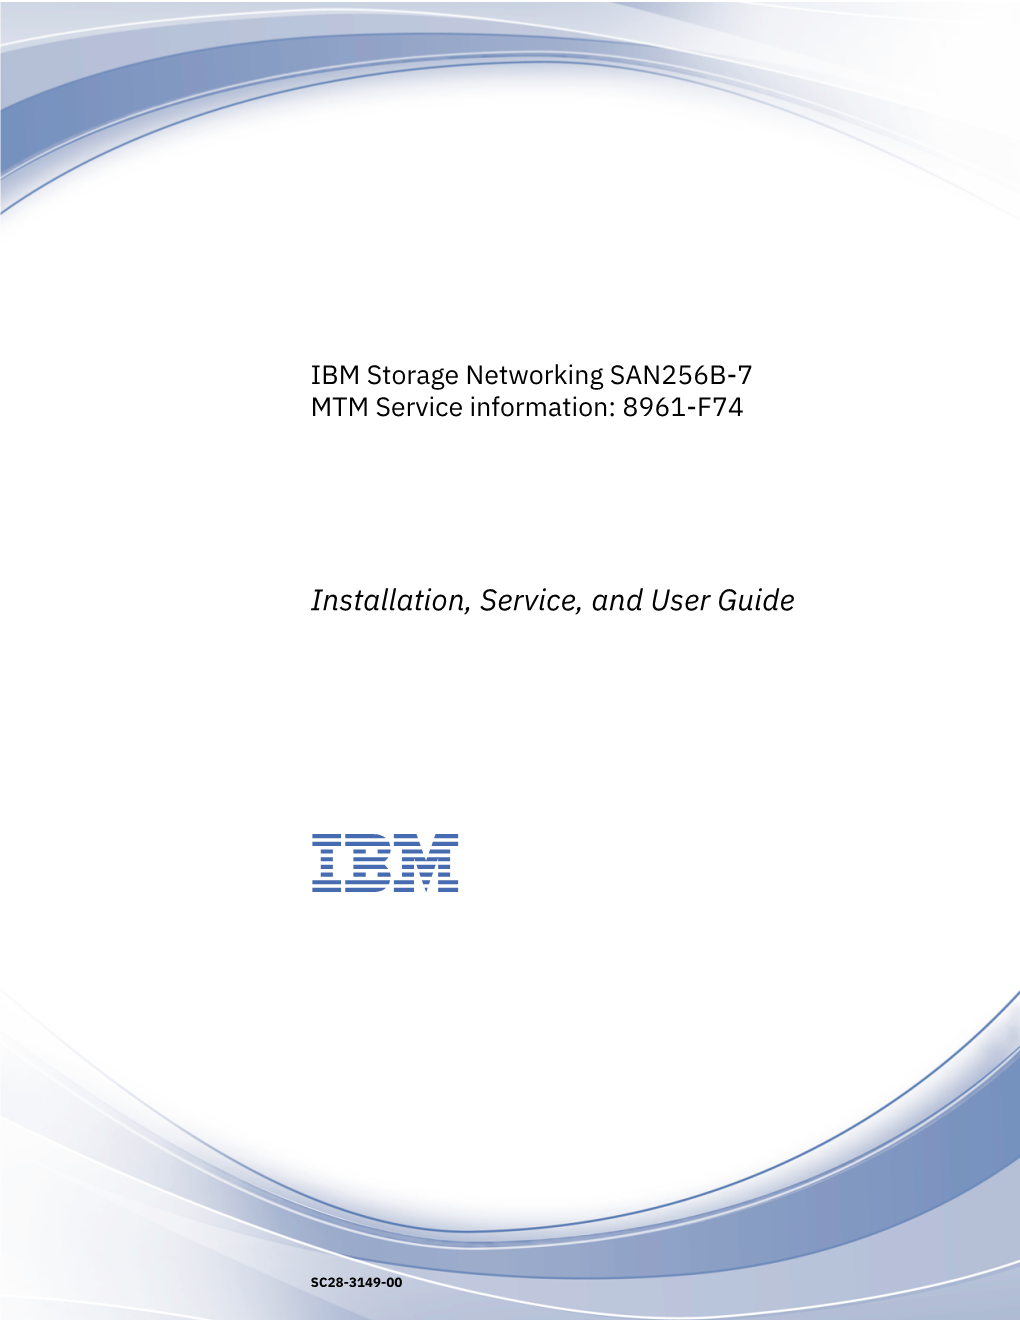 IBM Storage Networking SAN256B-7: SAN256B-7 Installation, Service, and User Guide Safety and Environmental Notices